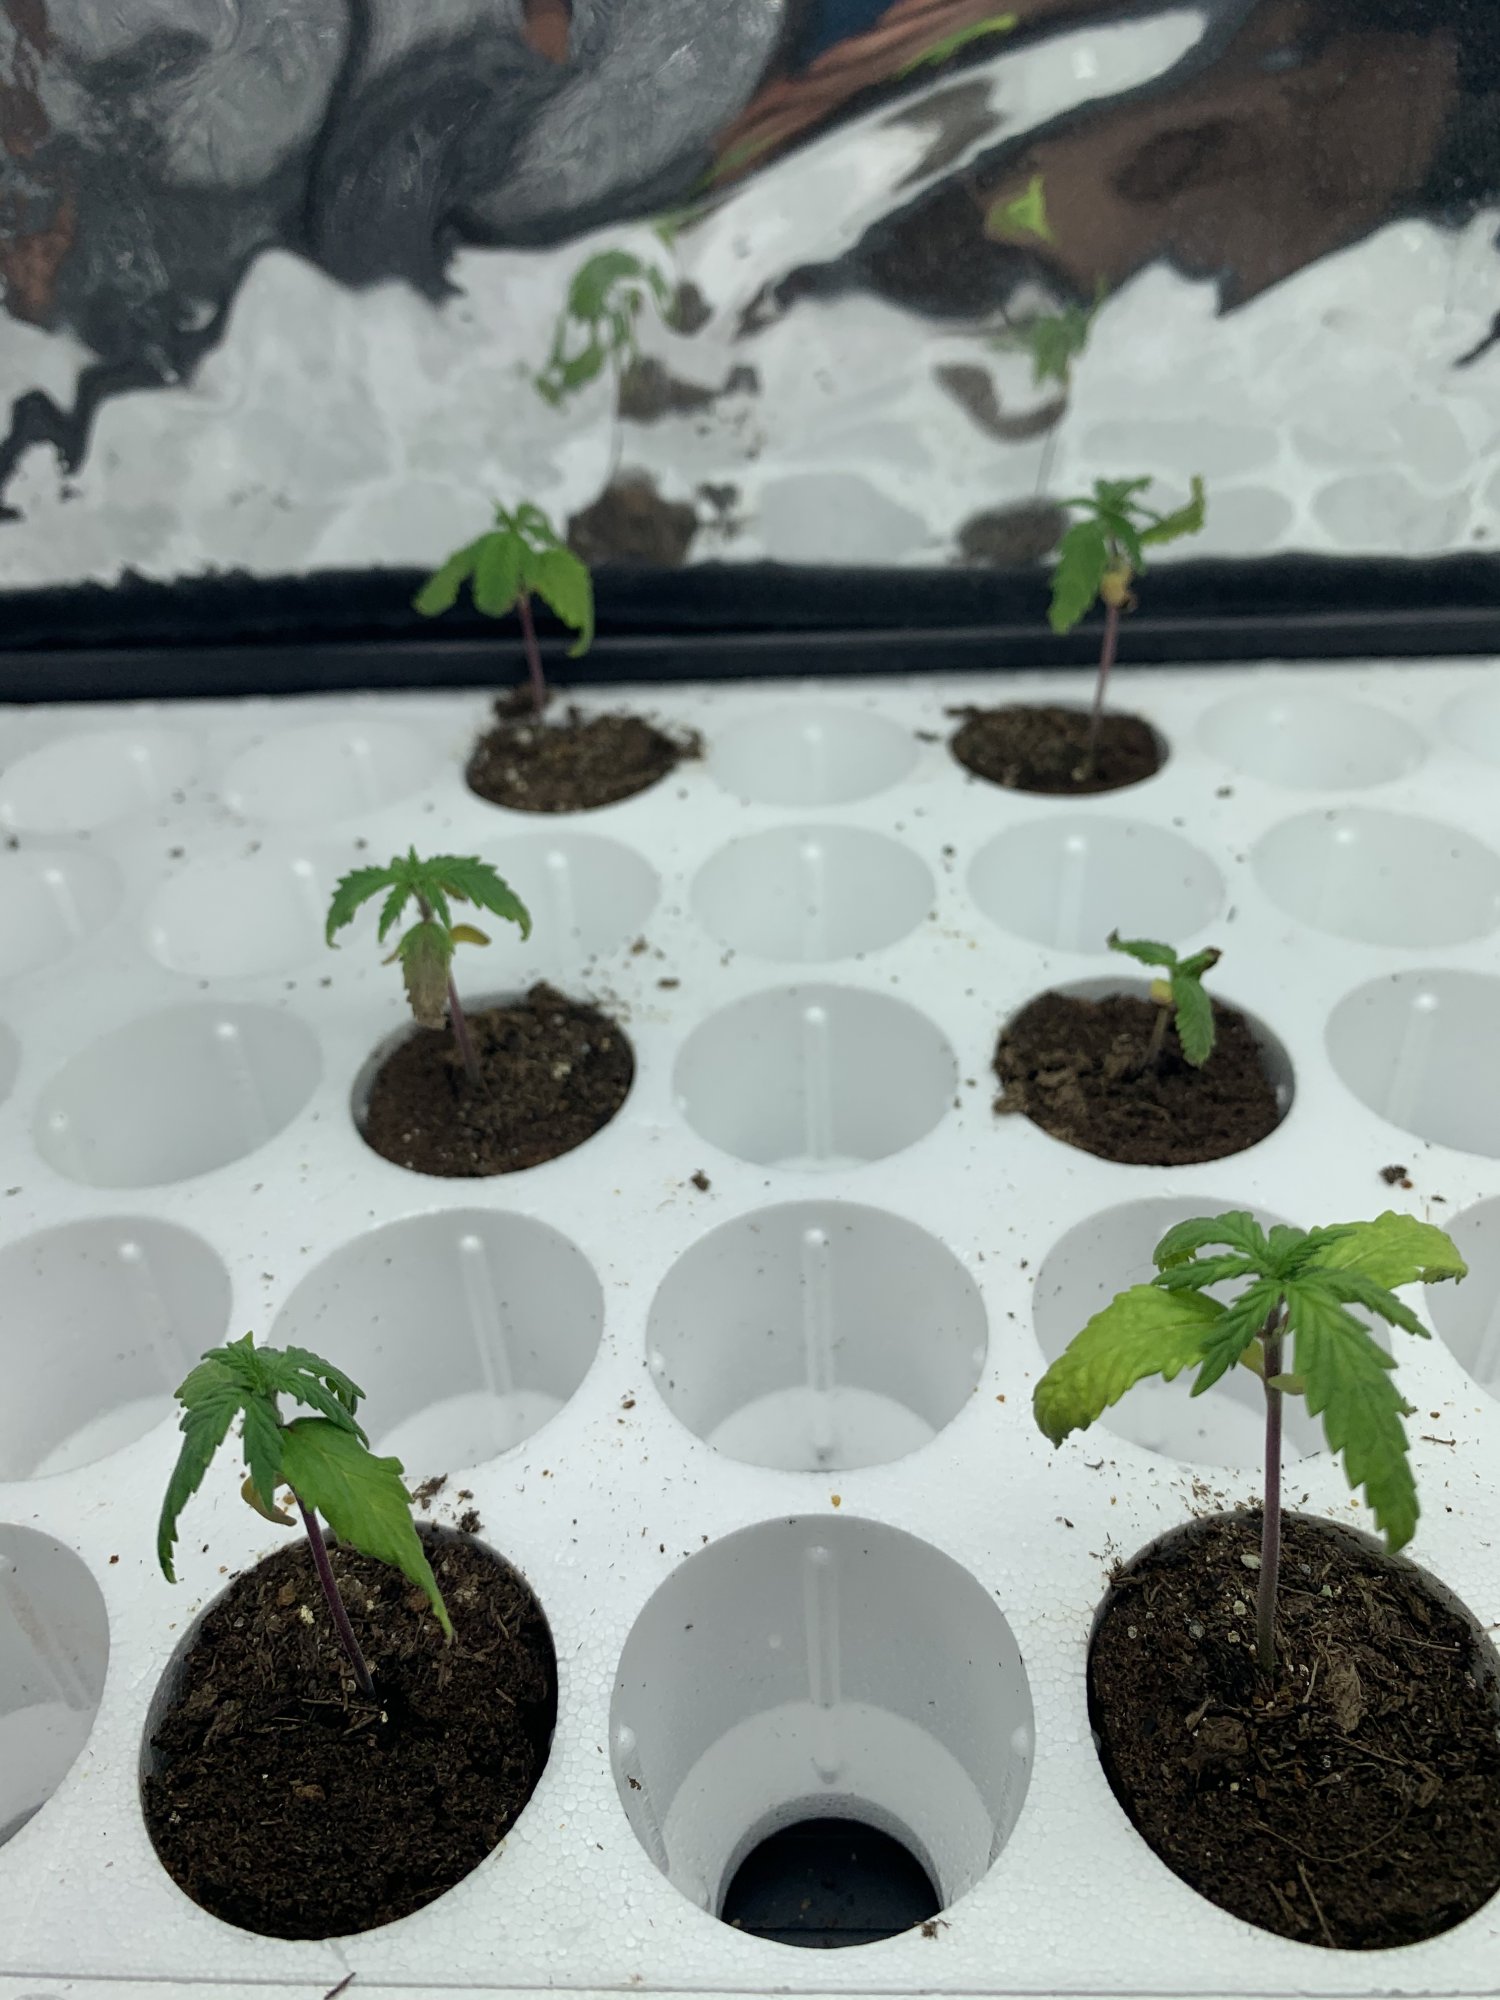 Whats wrong with my seedlings 2